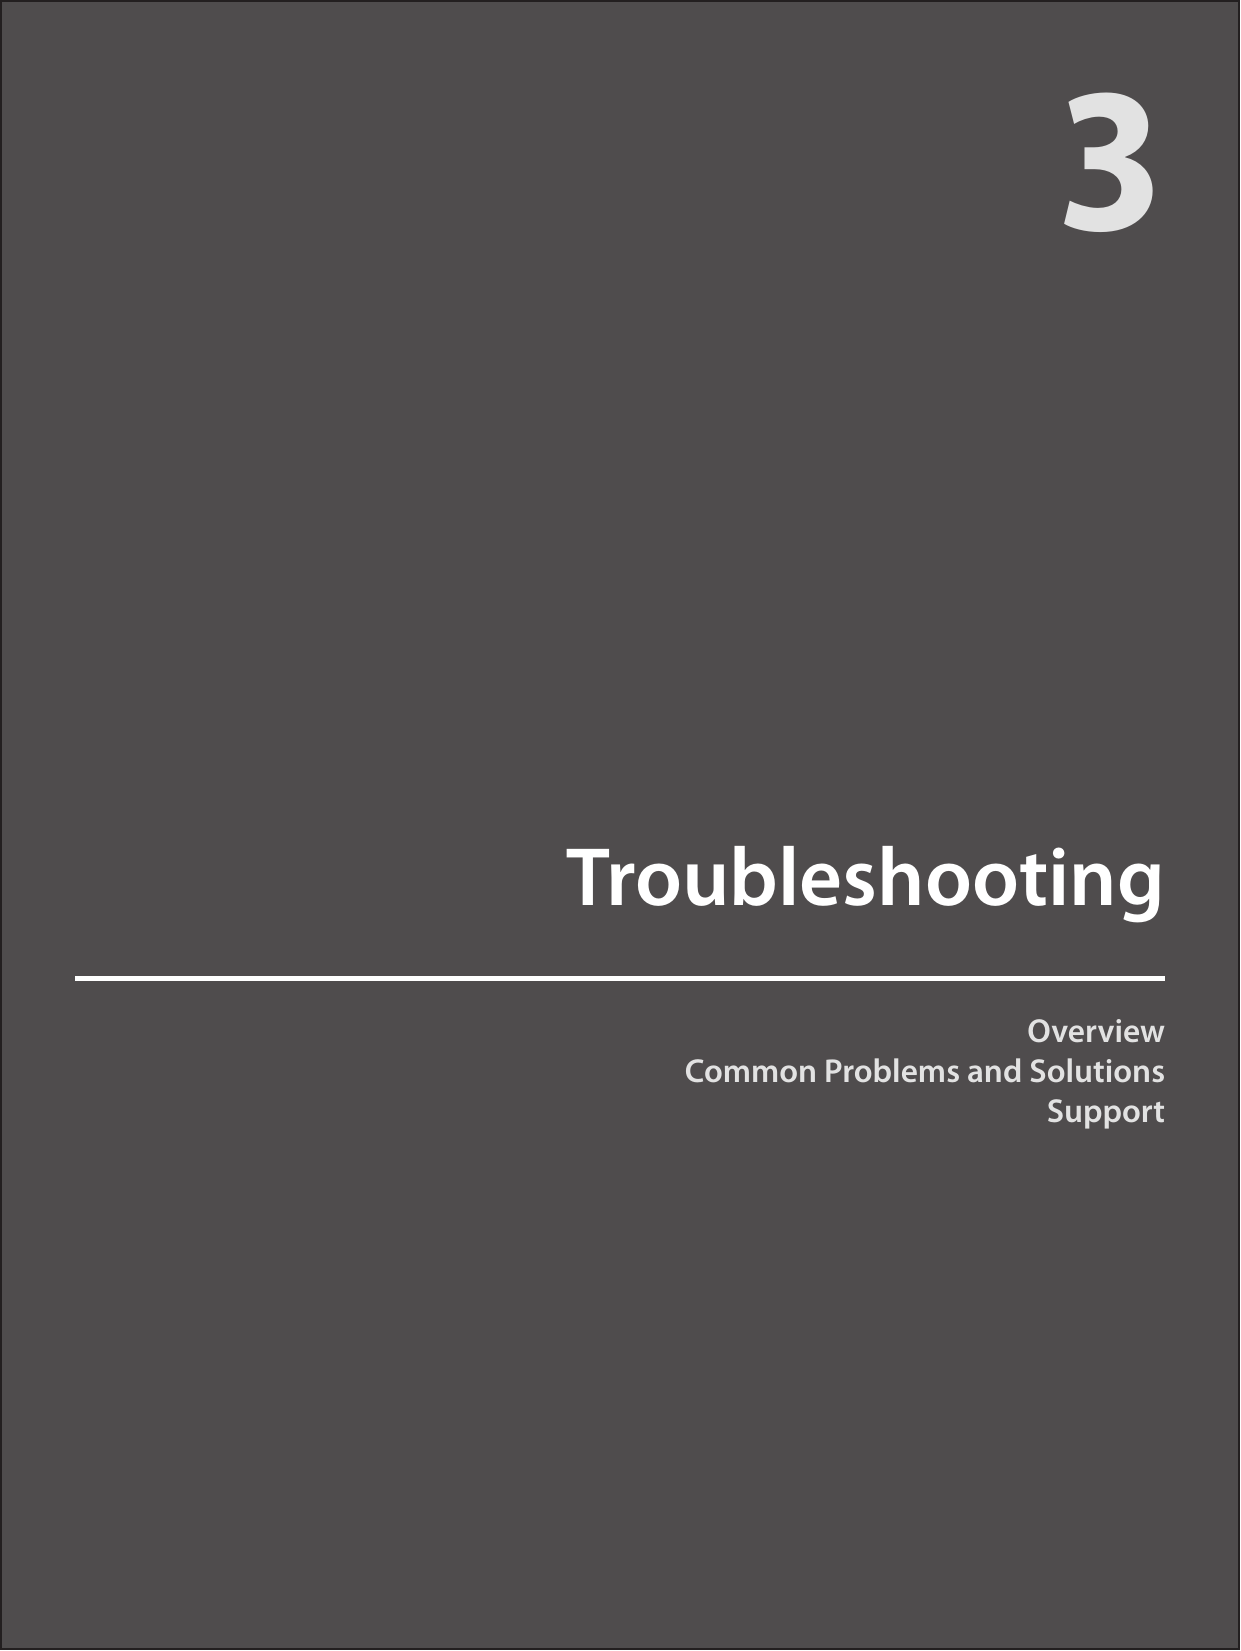 OverviewCommon Problems and SolutionsSupportTroubleshooting3